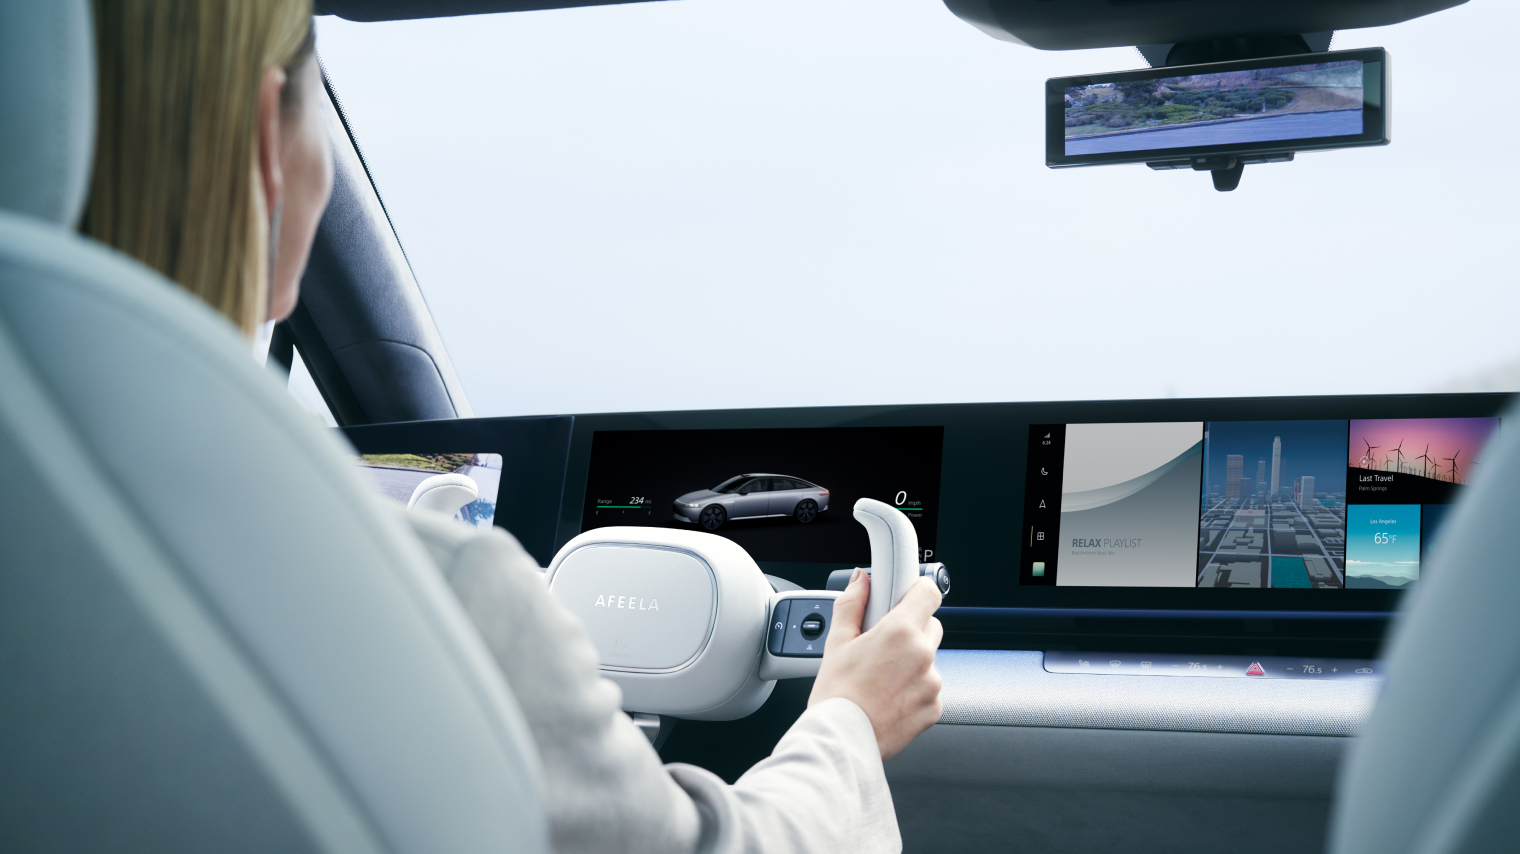 A sample image of a person taking a drive with AFEELA.